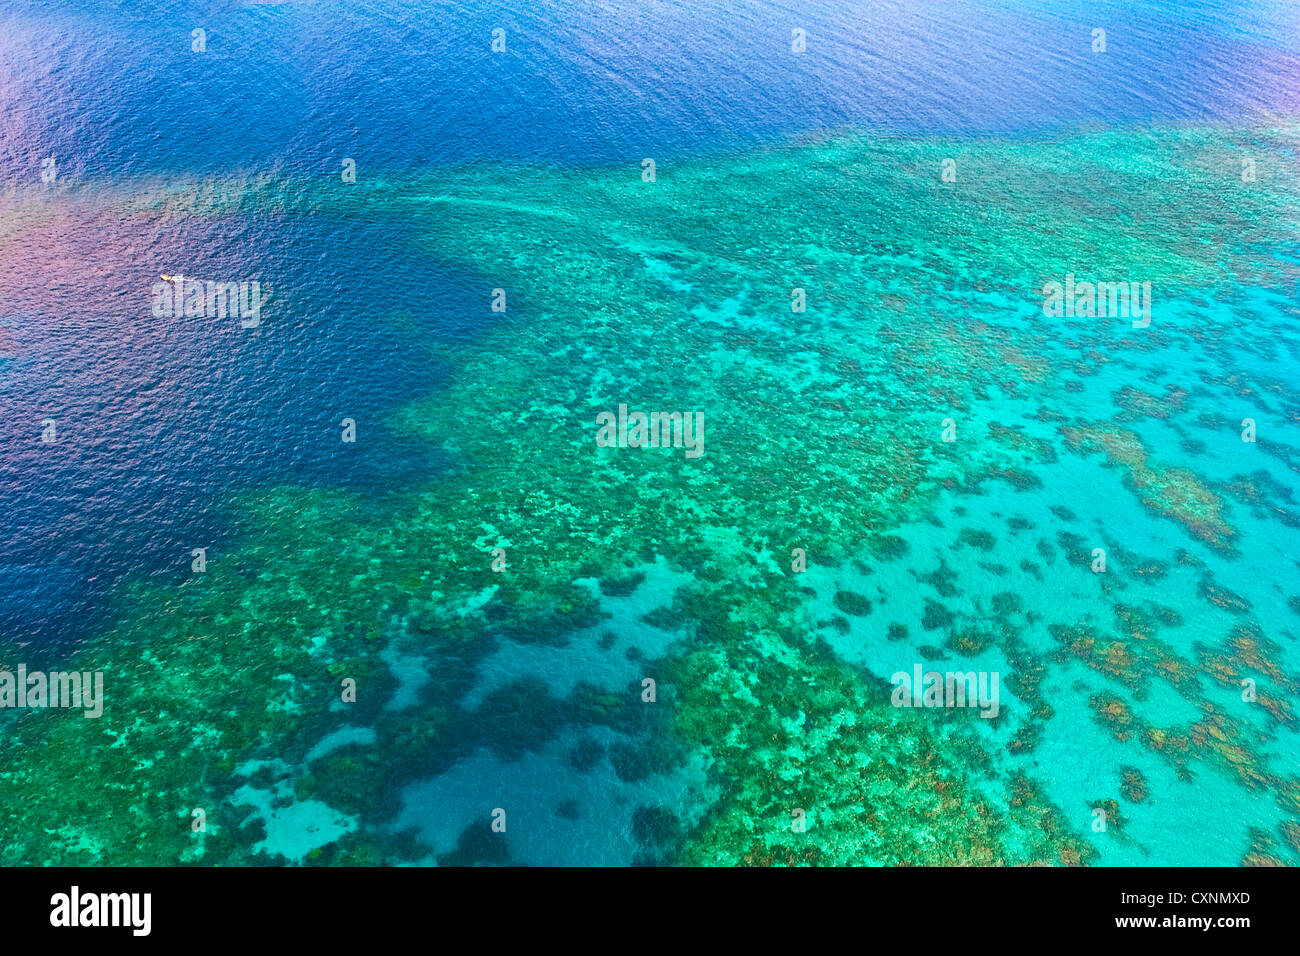 Aerial view of the Great Barrier Reef, Queensland, Australia Stock Photo